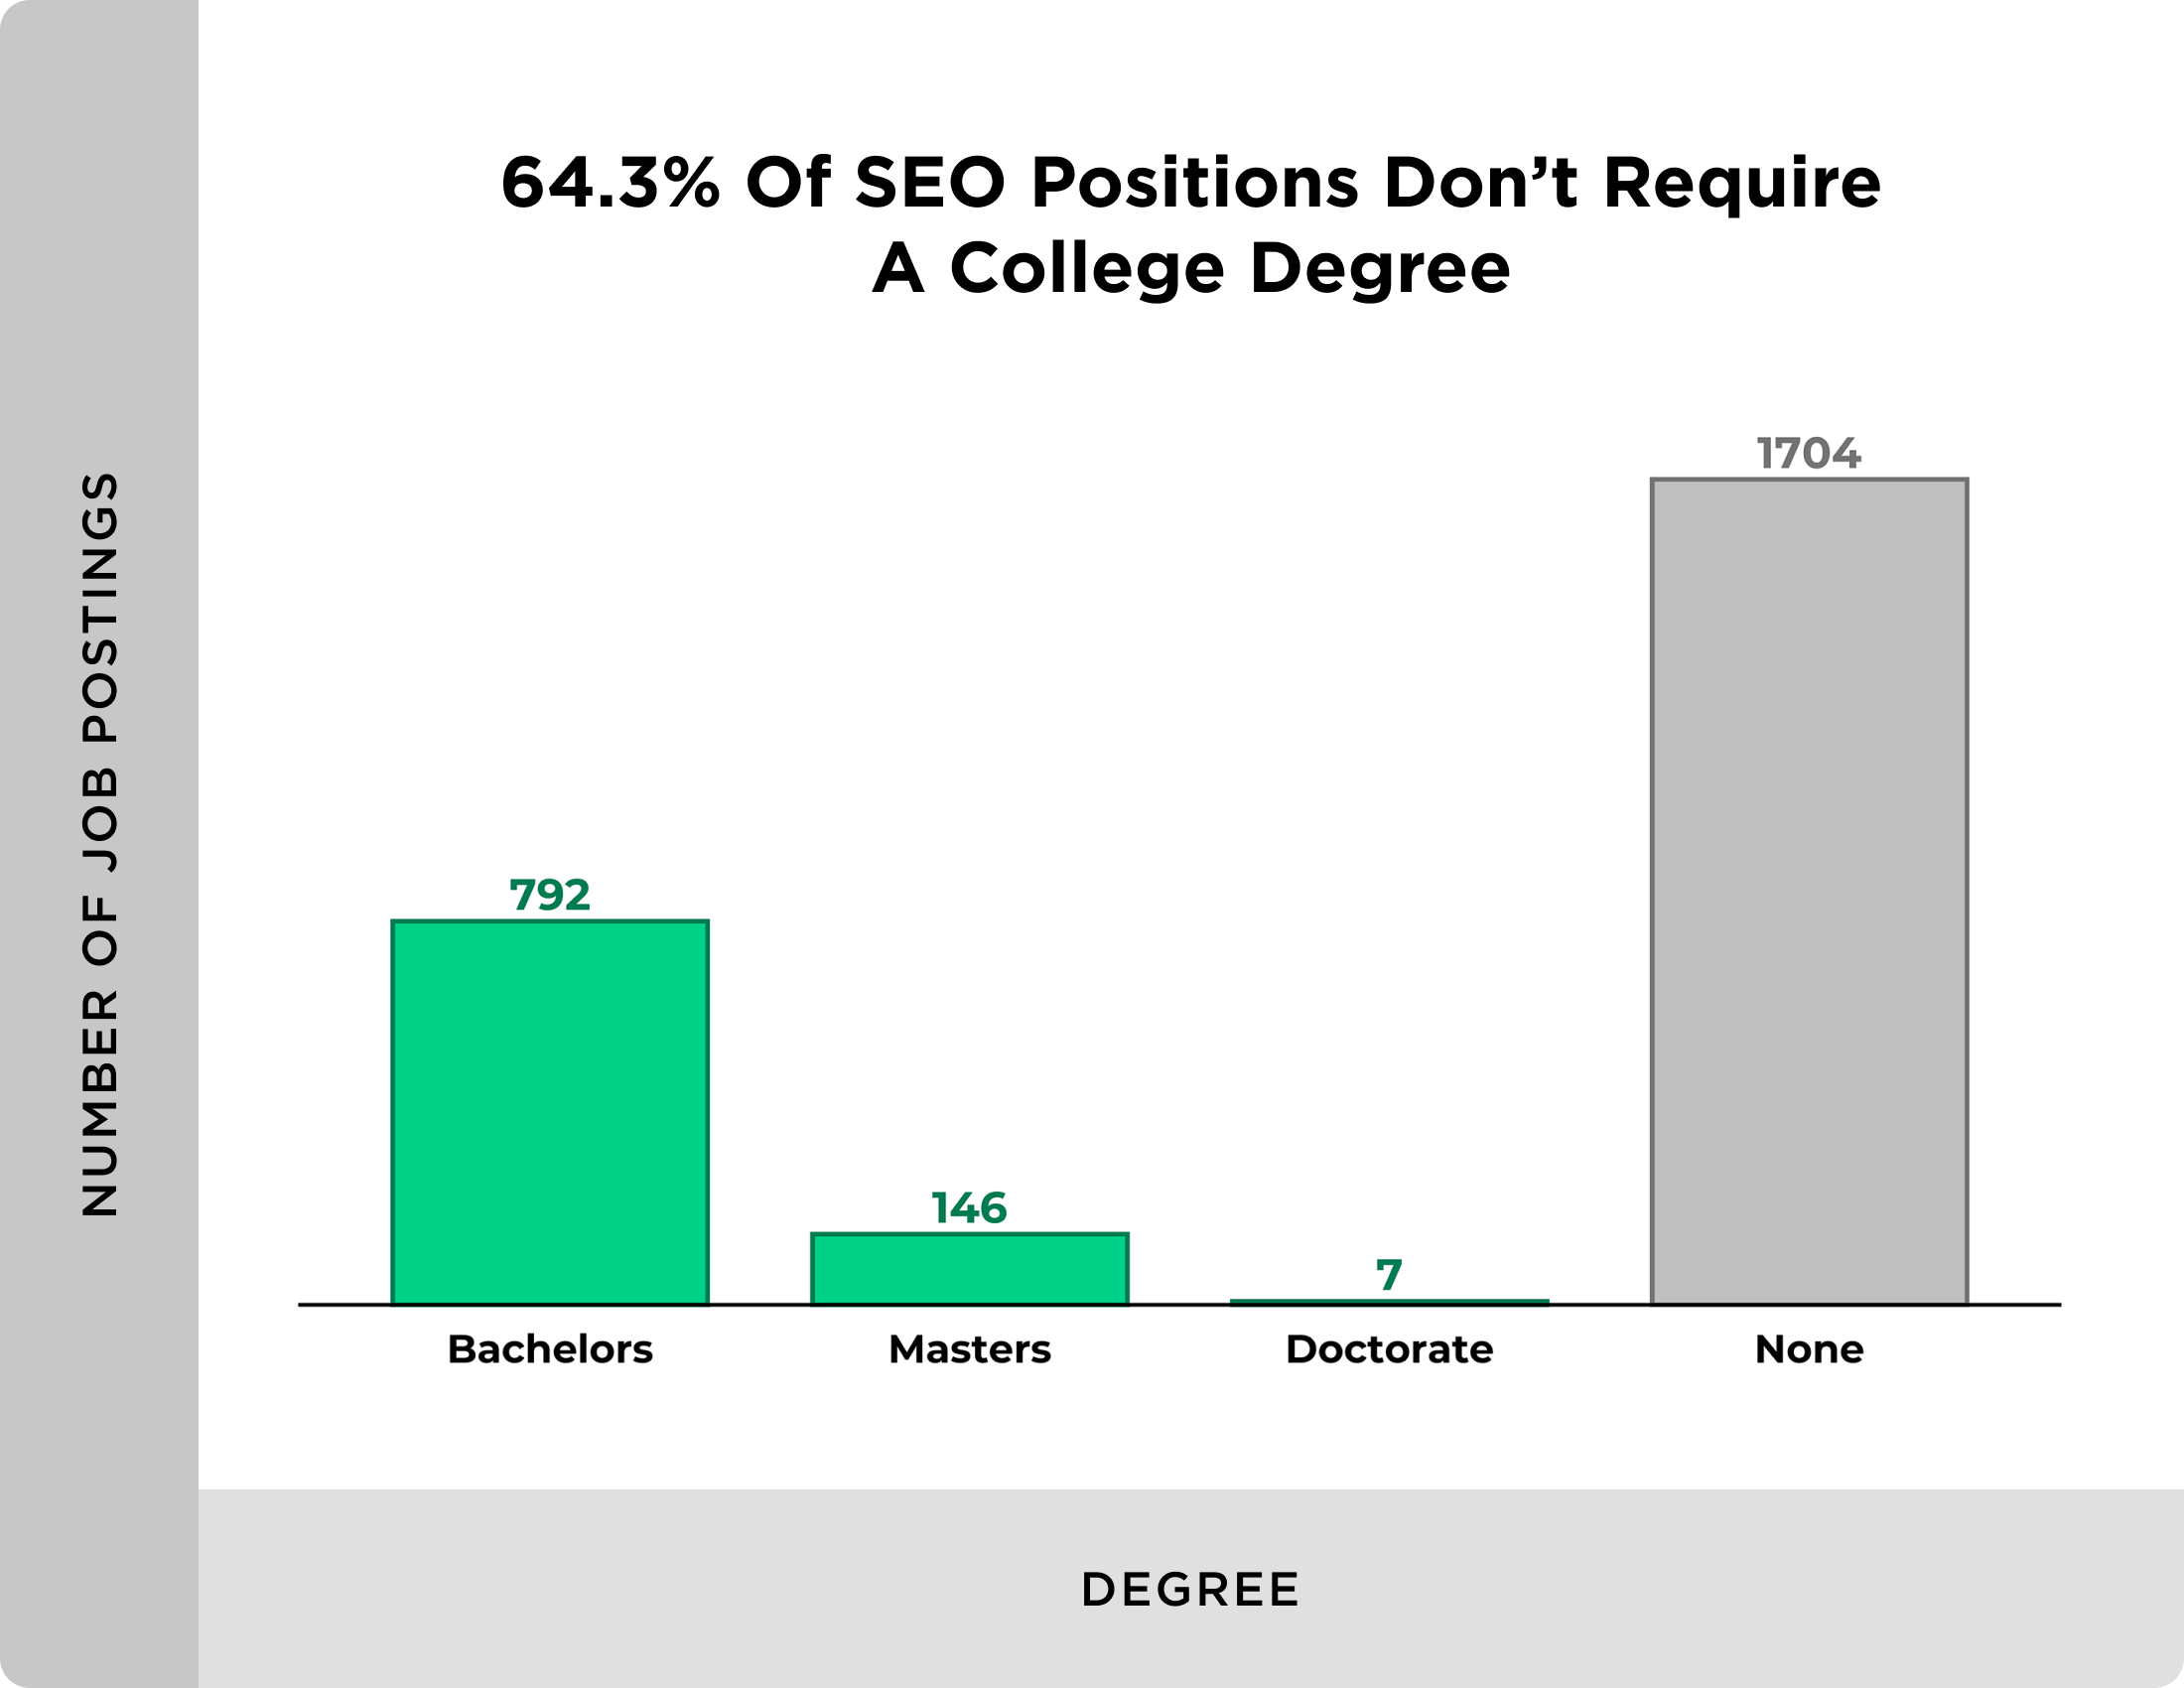 SEO positions with no degree requirement